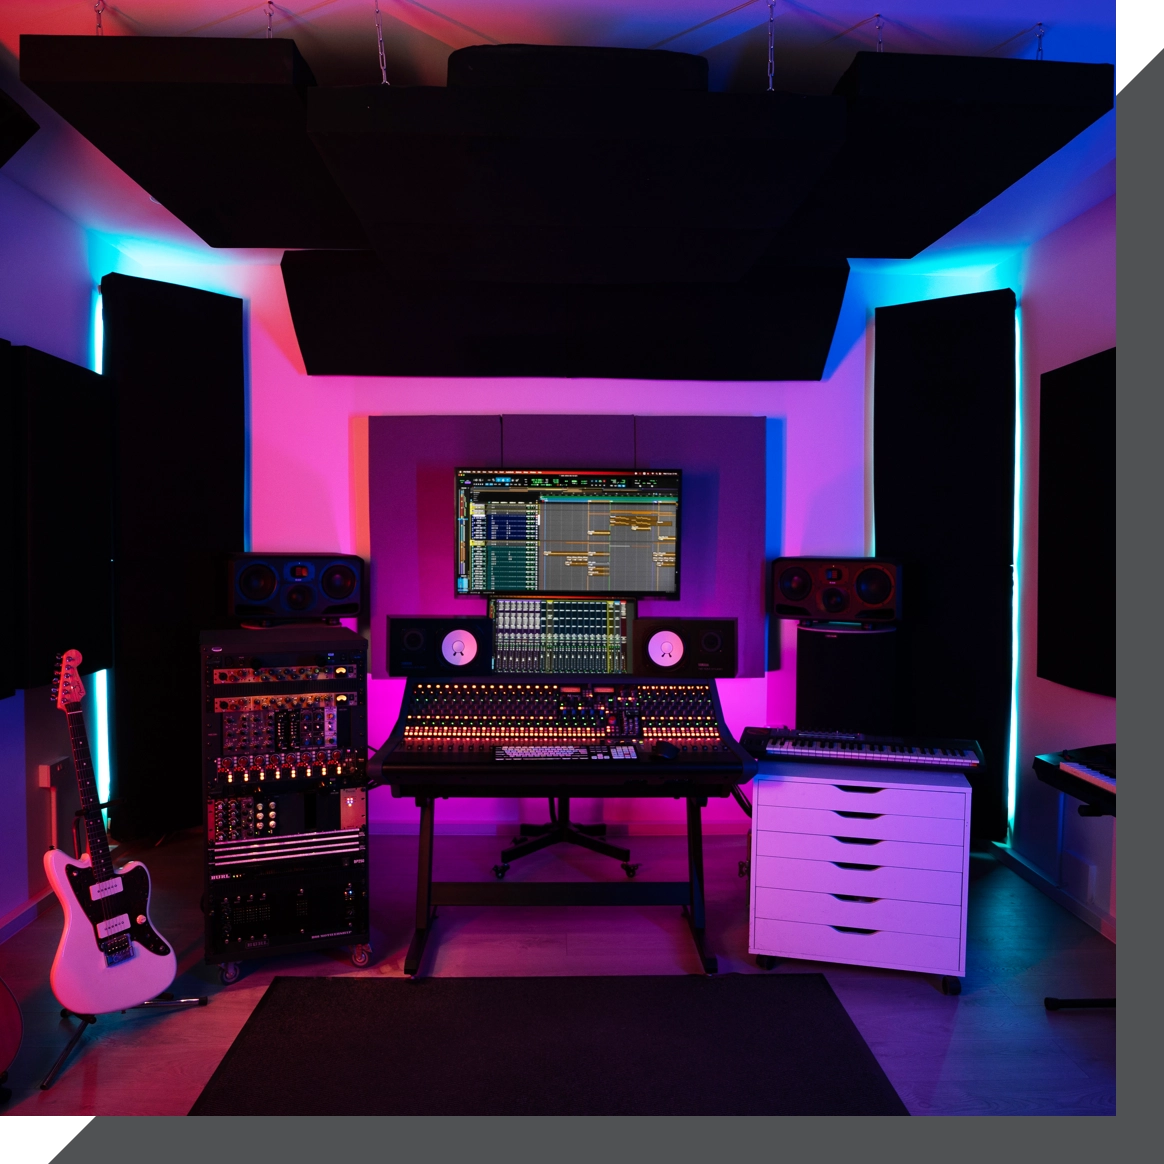 A modern recording studio in London with a central mixing console, dual monitors, and various audio equipment. Two guitars rest on the left, a keyboard on the right, and colored lighting illuminates the space. A window and an air conditioning unit are on the right wall.